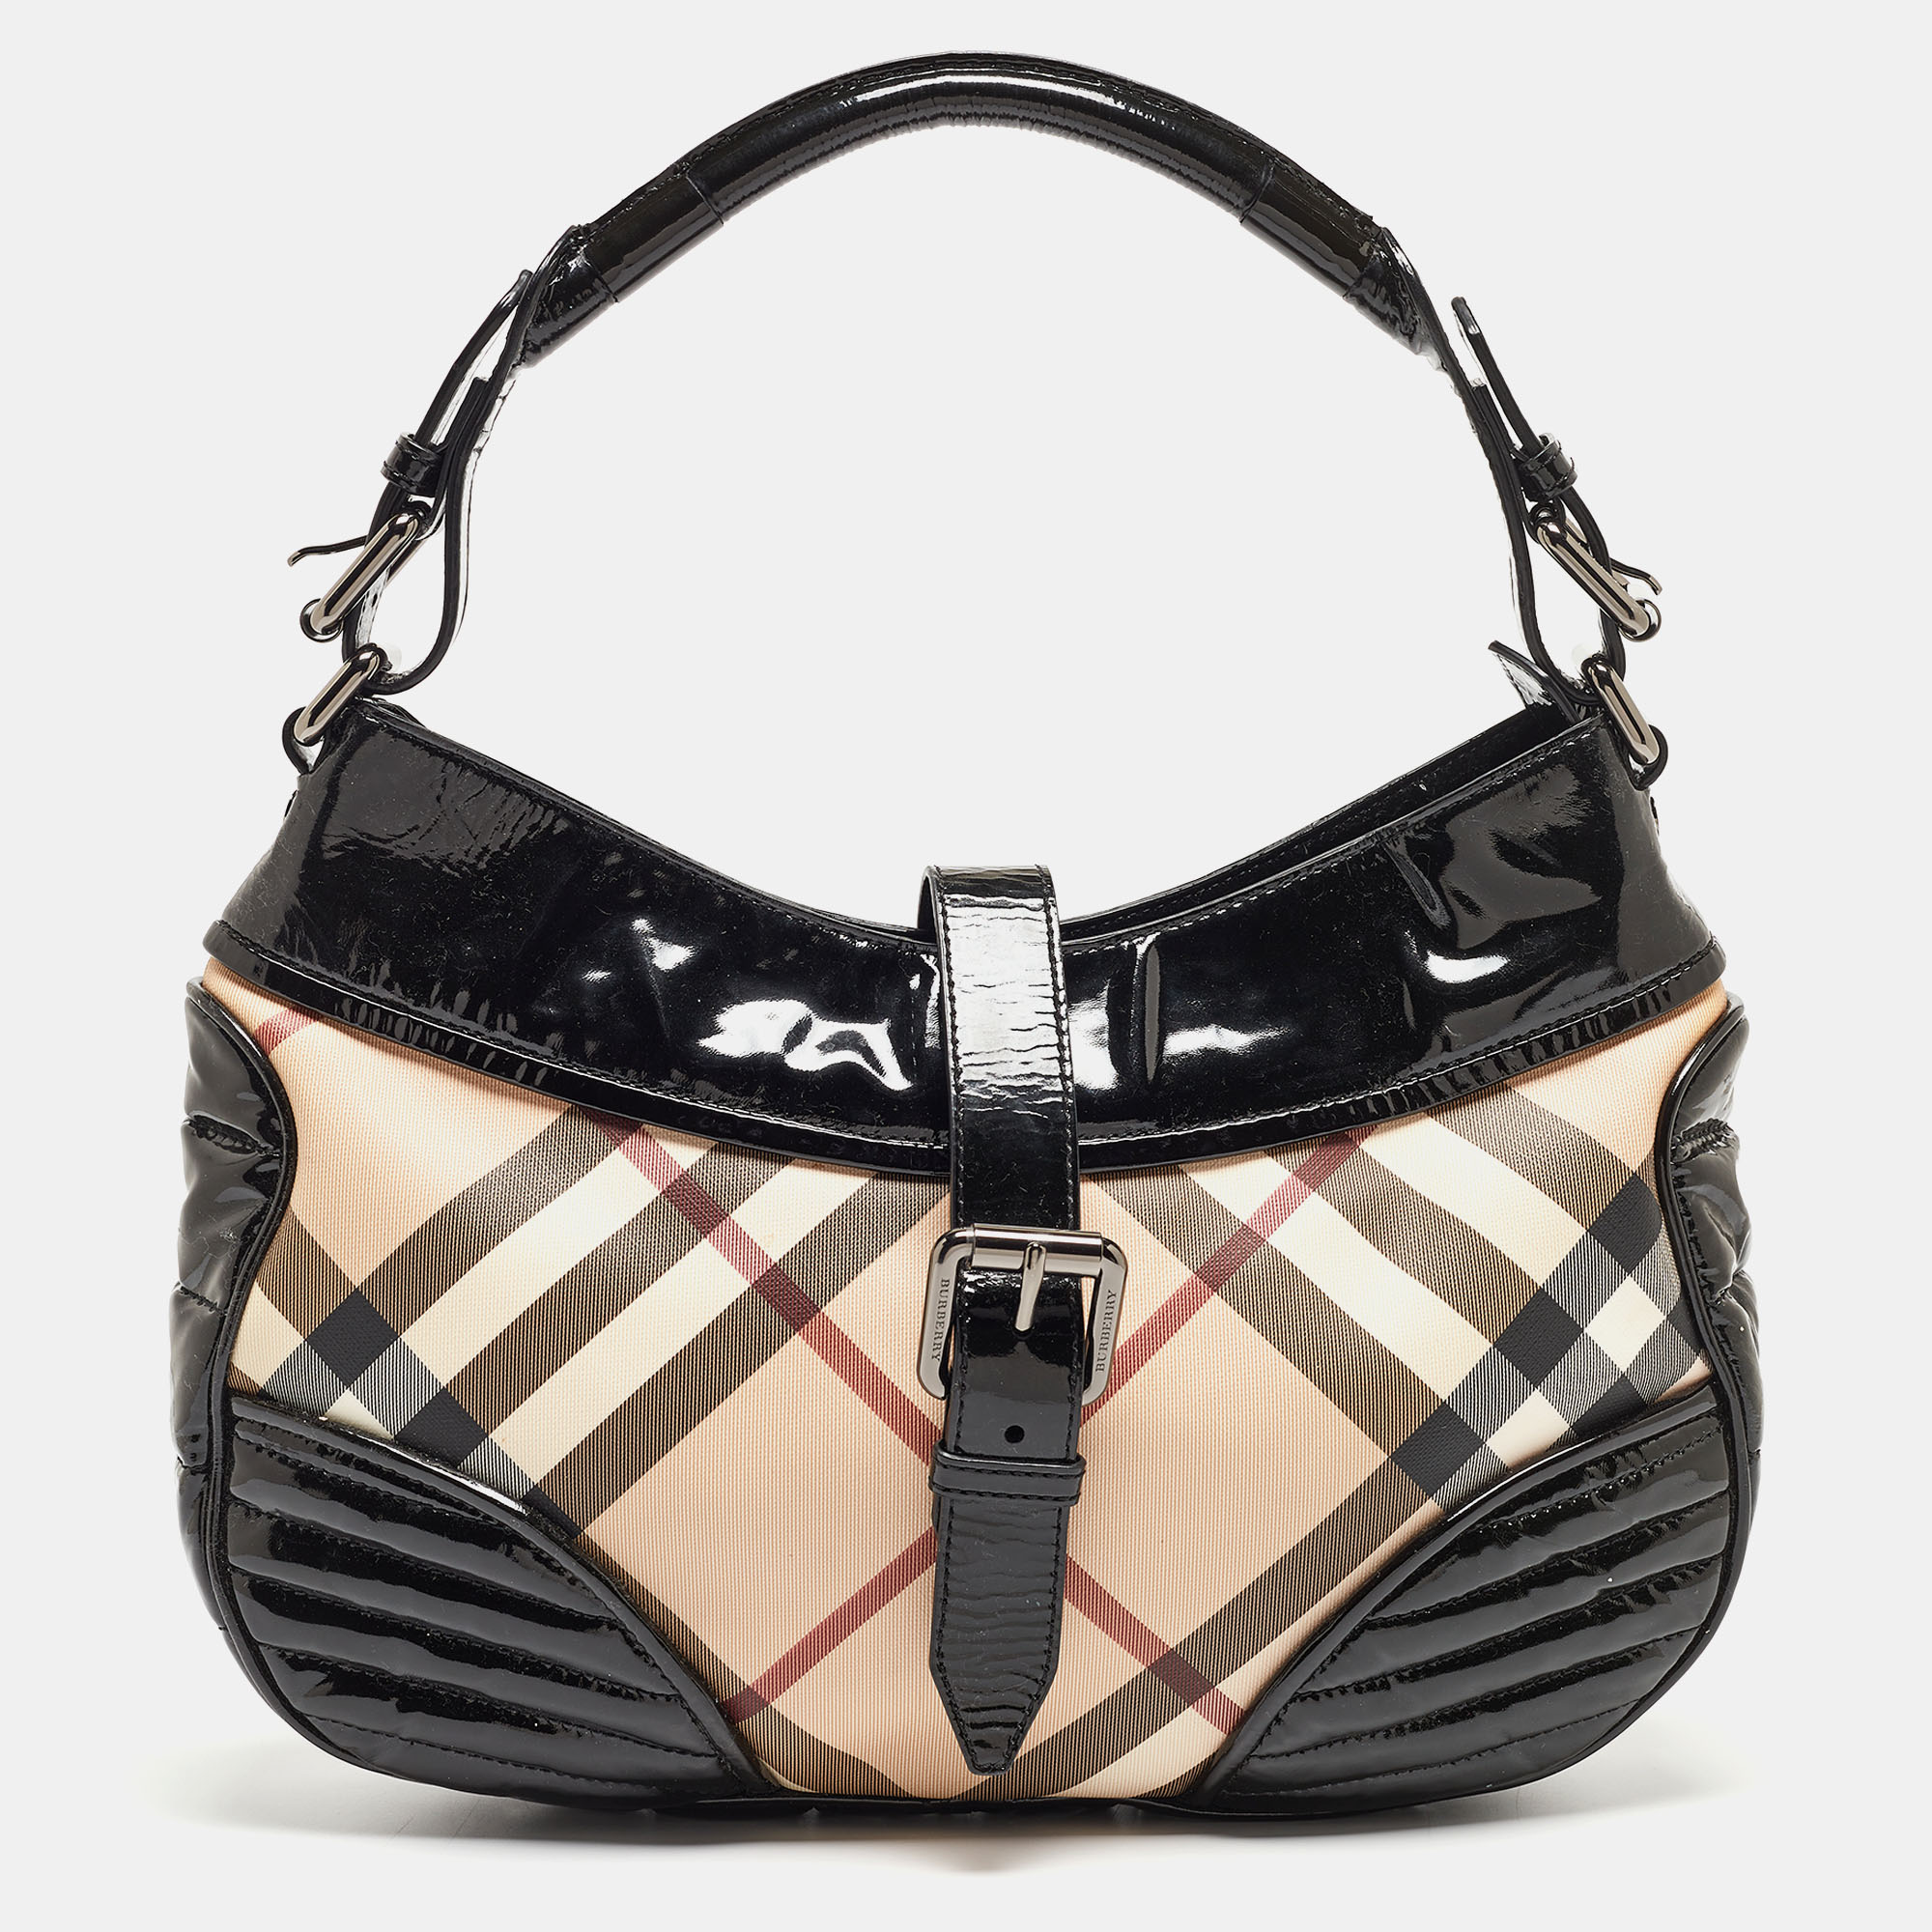 Pre-owned Burberry Black/beige Nova Check Pvc And Patent Leather Hobo